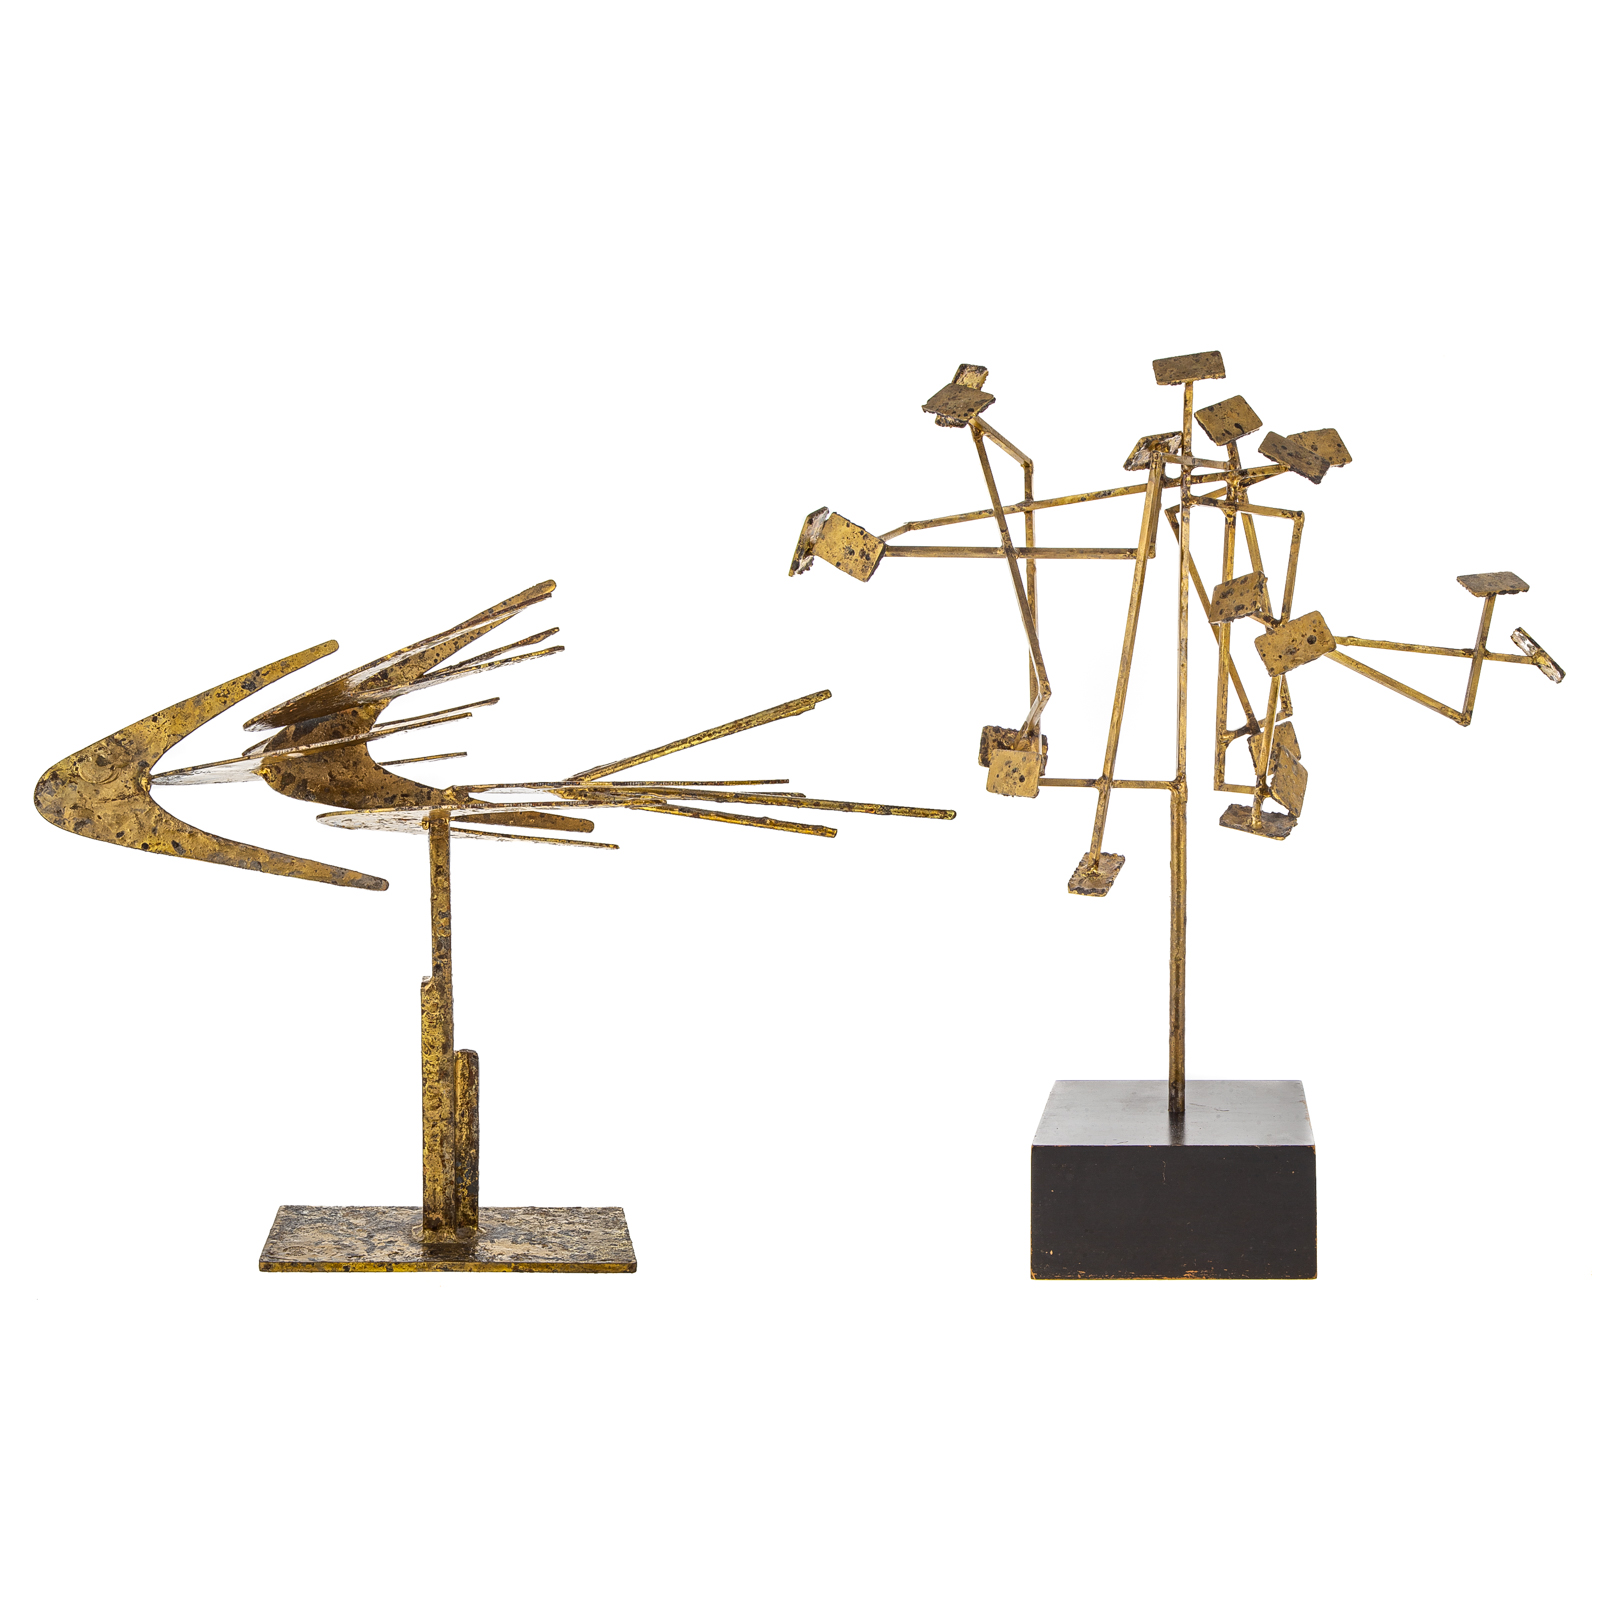 TWO BRUTALIST ABSTRACT METAL SCULPTURES 29ea3e